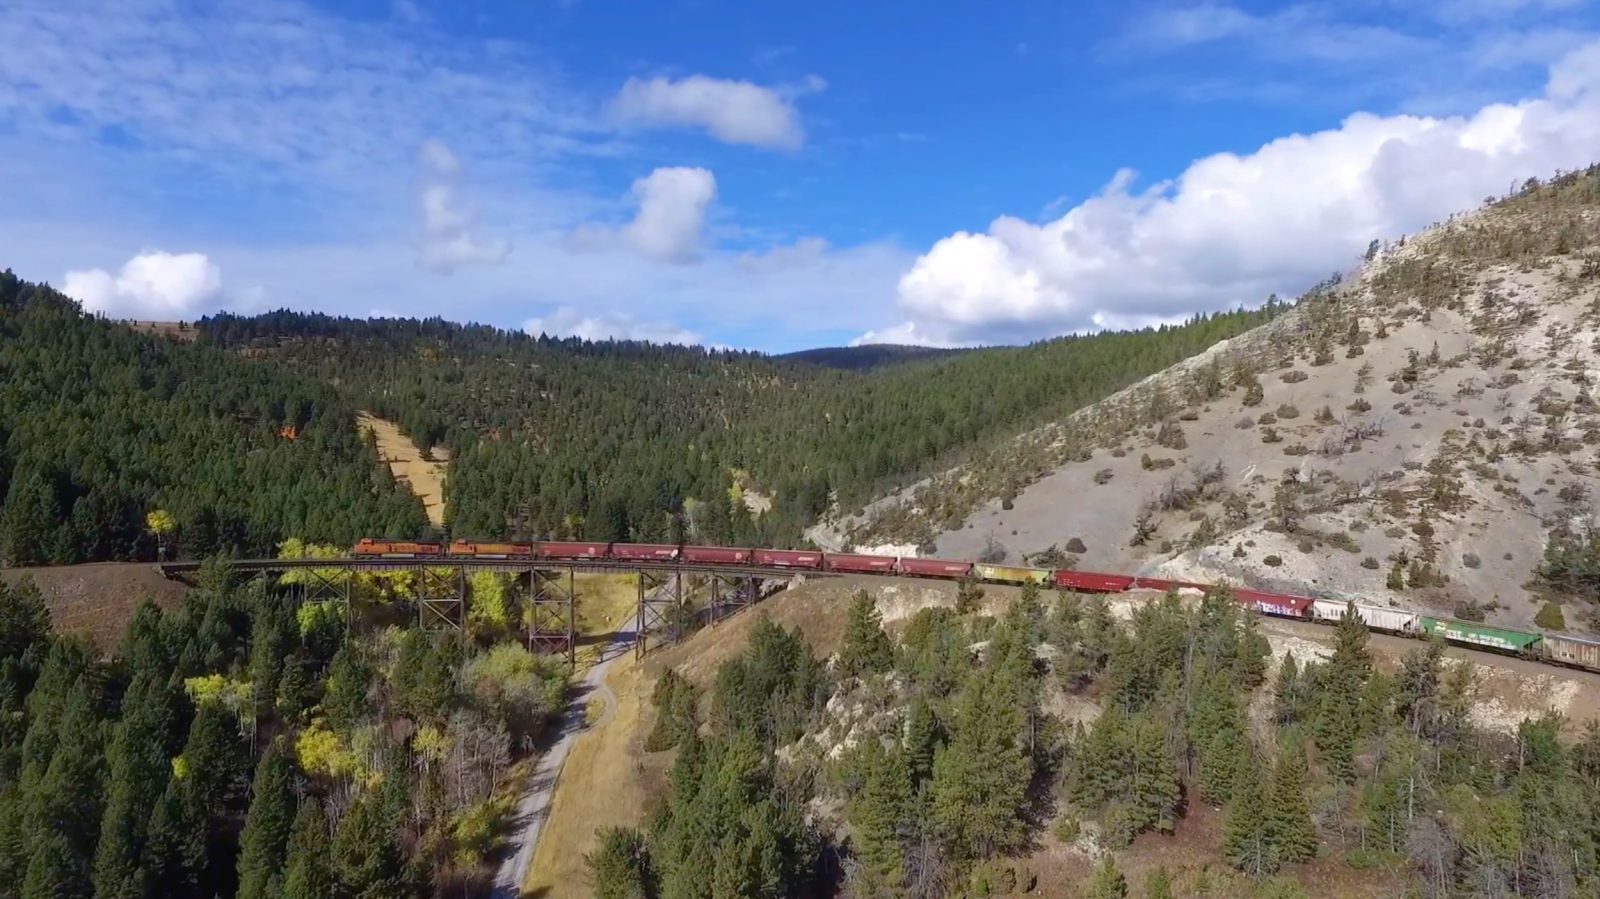 Dronerise - freight train captured by UAS